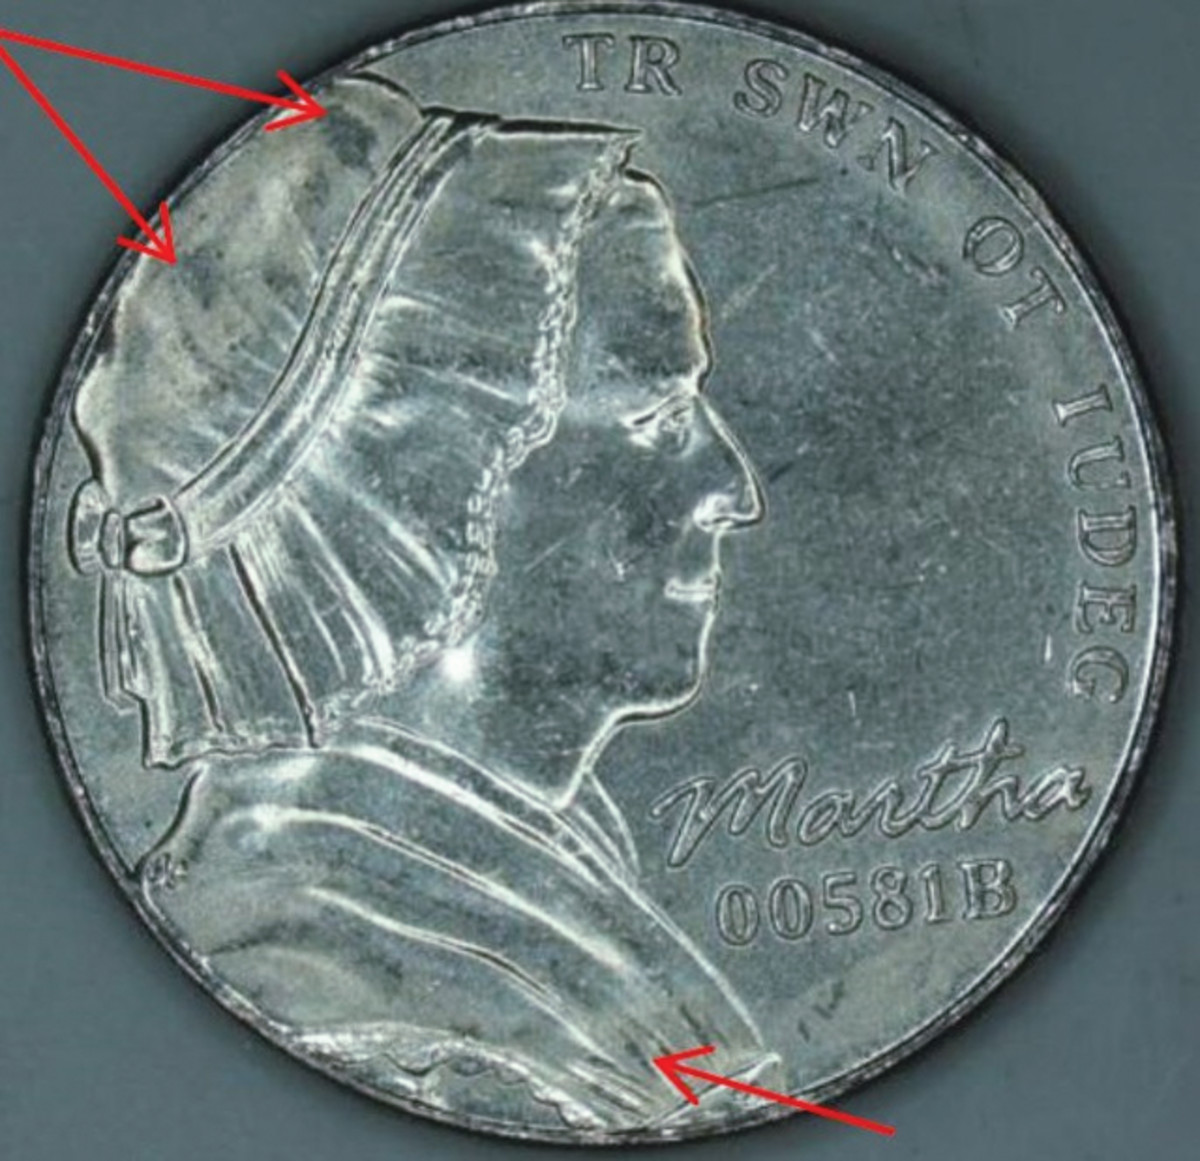 Martha Washington’s portrait was used on test strikes of various compositions for the nickel. This one is multi-ply plated steel. The arrows indicate areas where planchet metal did not flow completely into the recesses of the die when struck under 54 tonnes to 60 tonnes pressure. Regular nickels are struck with 54 tonnes pressure.